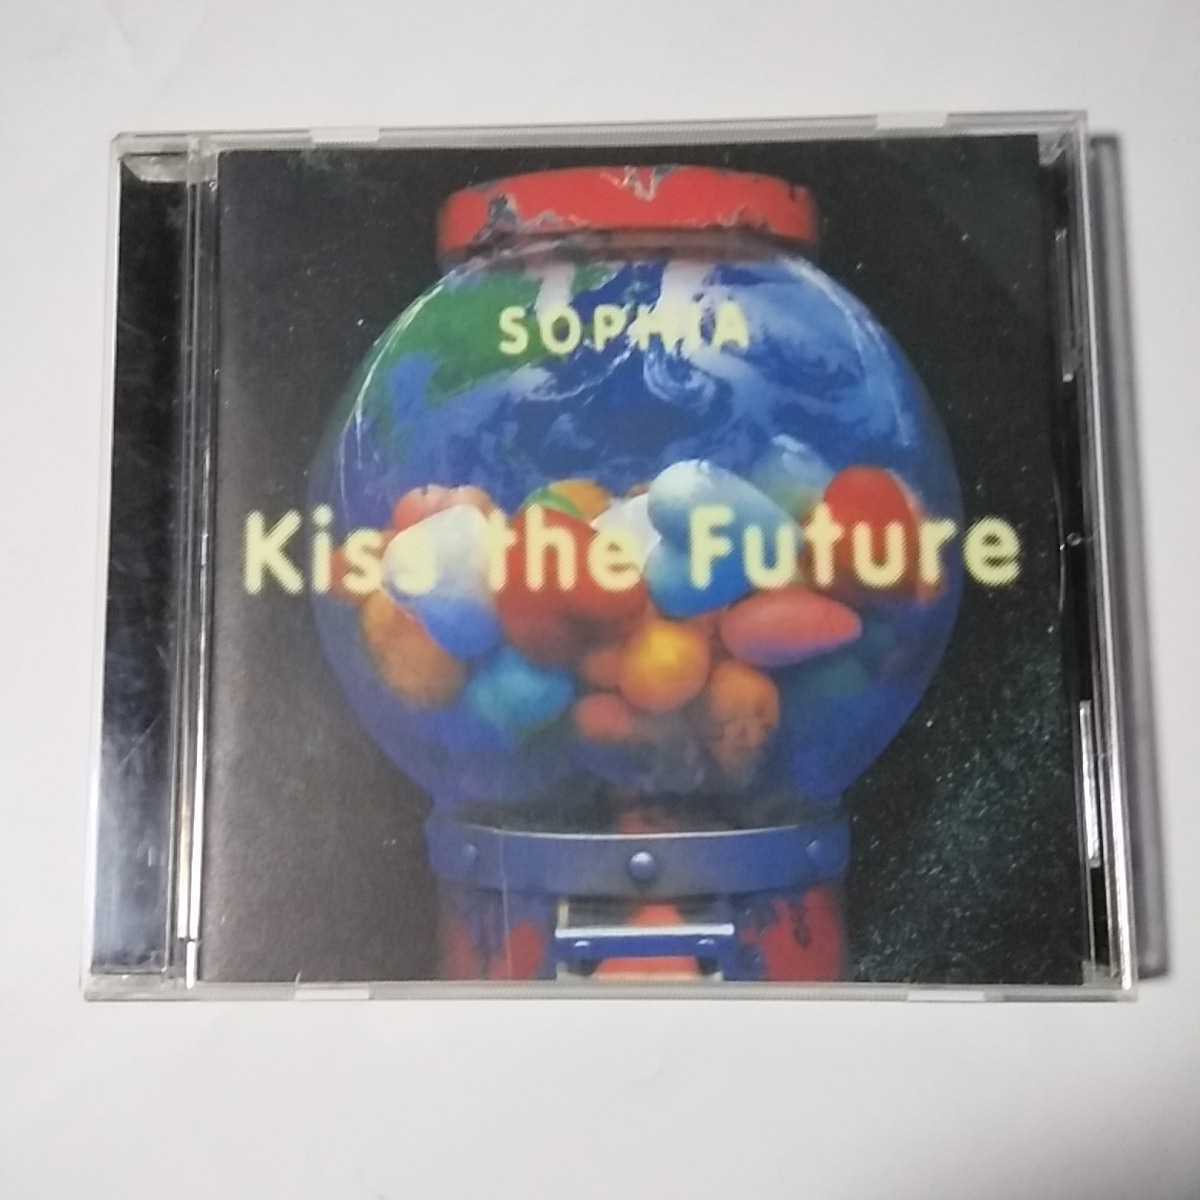 M027　CD　SOPHIA　Kiss the Future　１．State of love　２．Maybe　３．Early summer rain　４．Dear my crescent_画像1